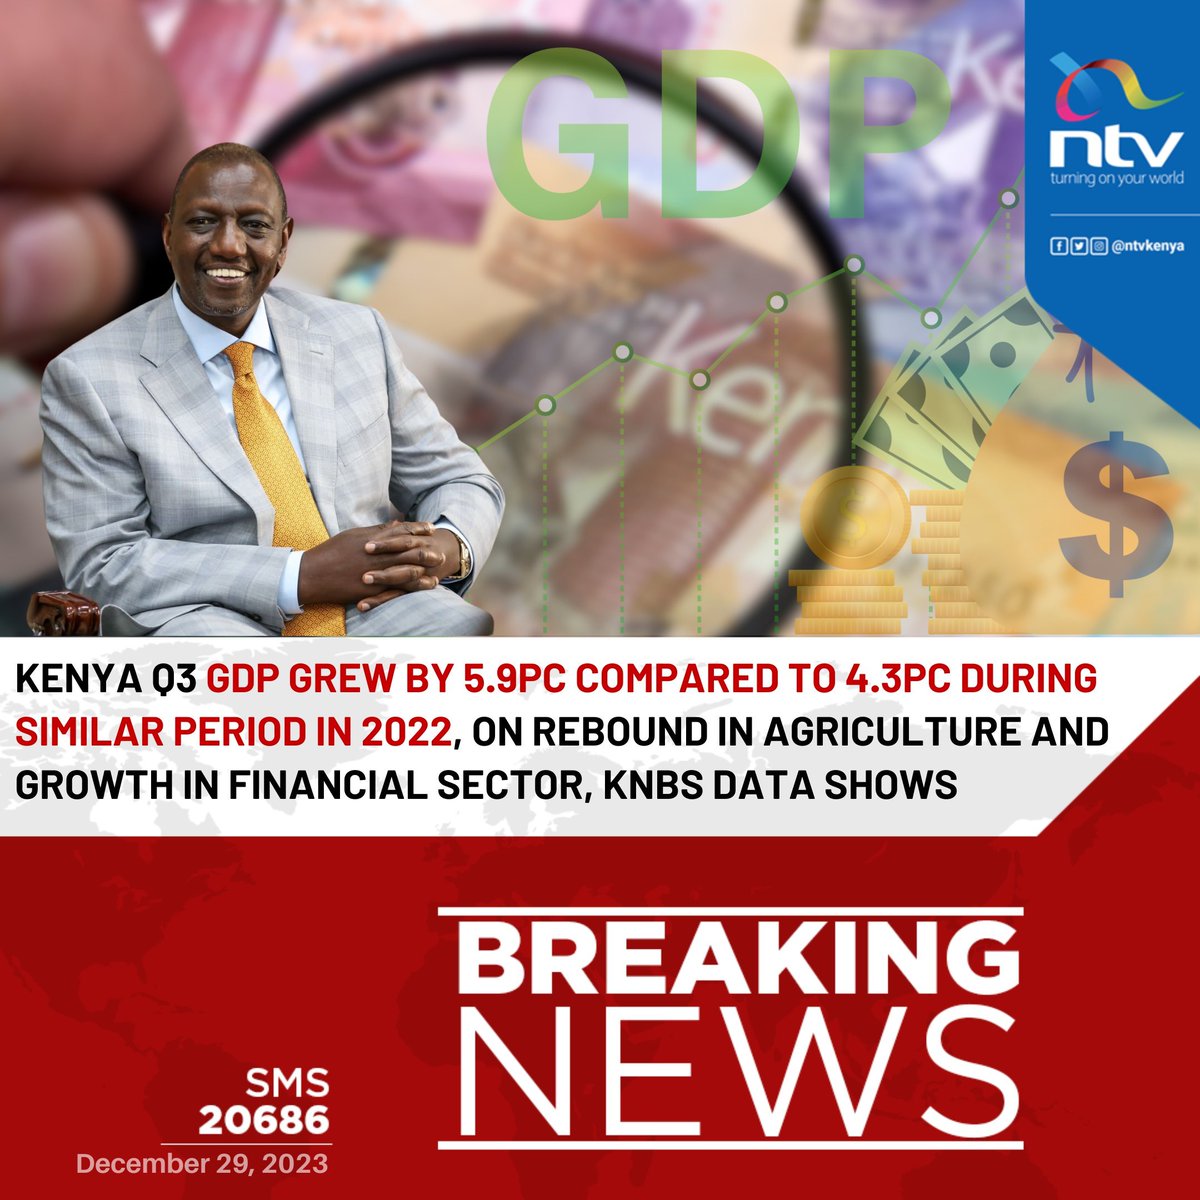 JUICY NEWS TO SUM UP PRESIDENTRUTO'S ONE YEAR IN OFFICE: 

Kenya's Q3 GDP has grown by 5.9 per cent compared to 4.3pc during a similar period in 2022.

When we said give this man time, we knew he had all it takes to turn things around.